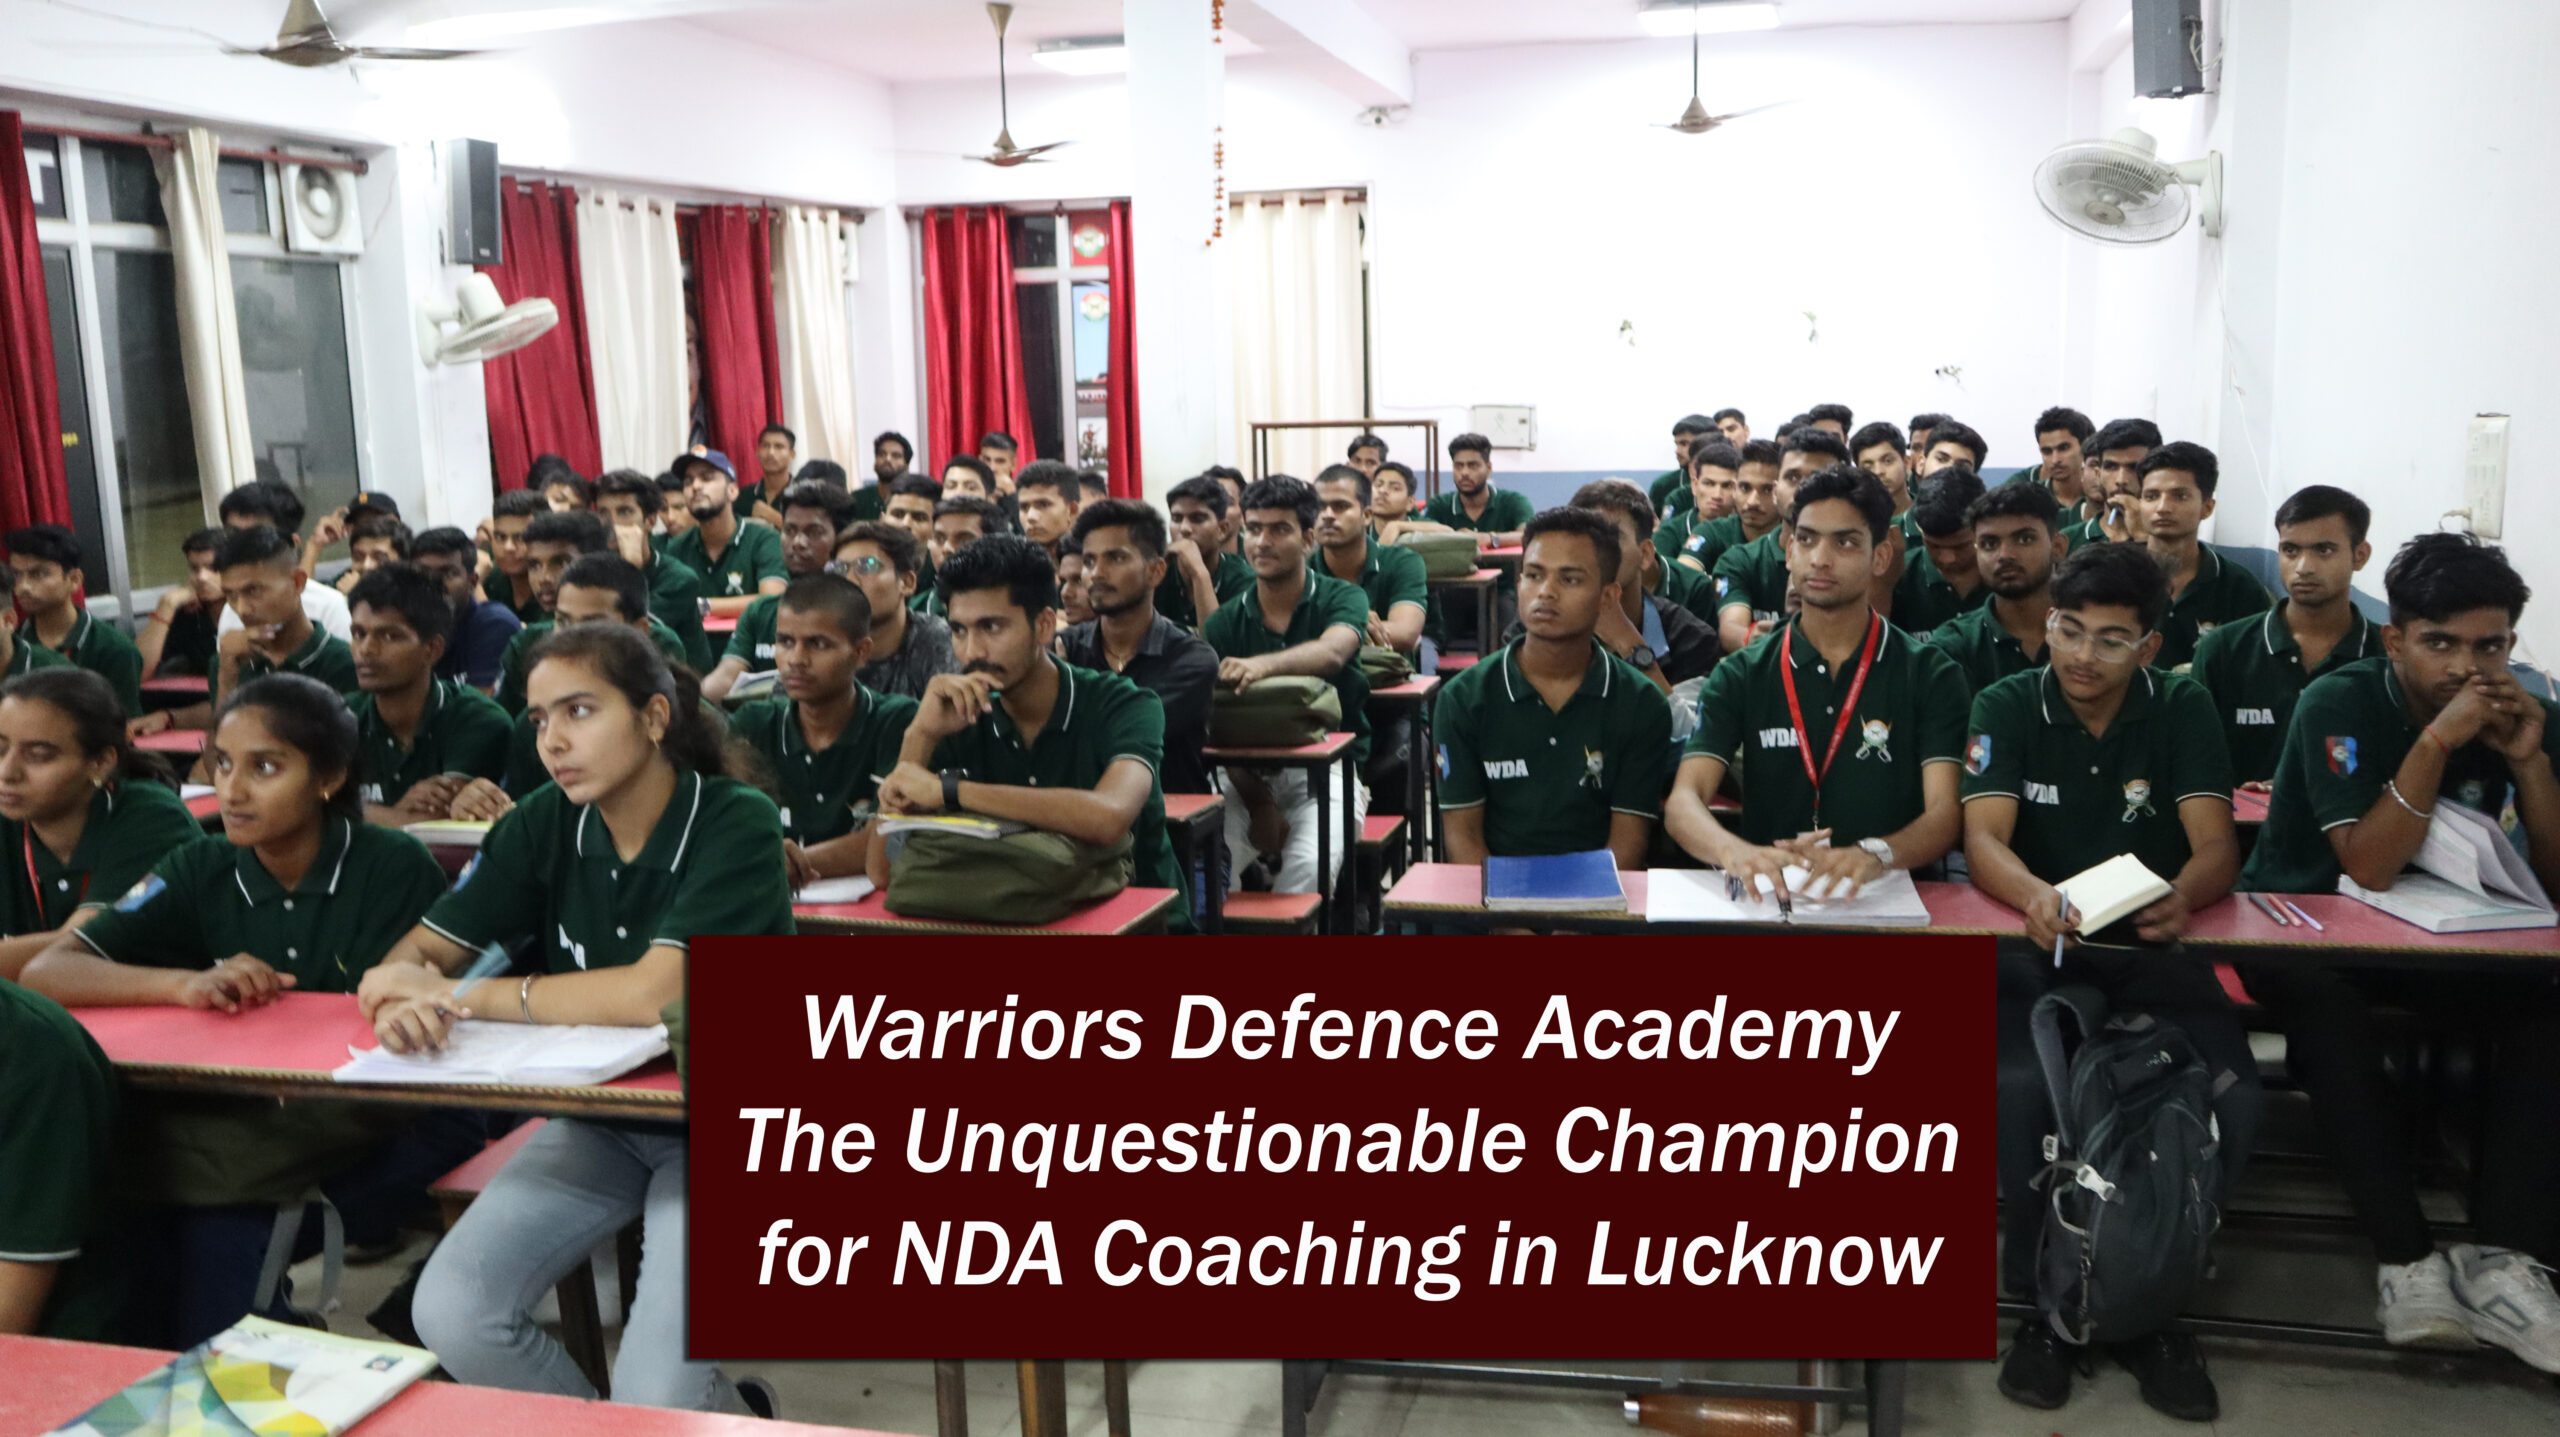 #Warriors Defence Academy The Unquestionable Champion for NDA Coaching in Lucknow